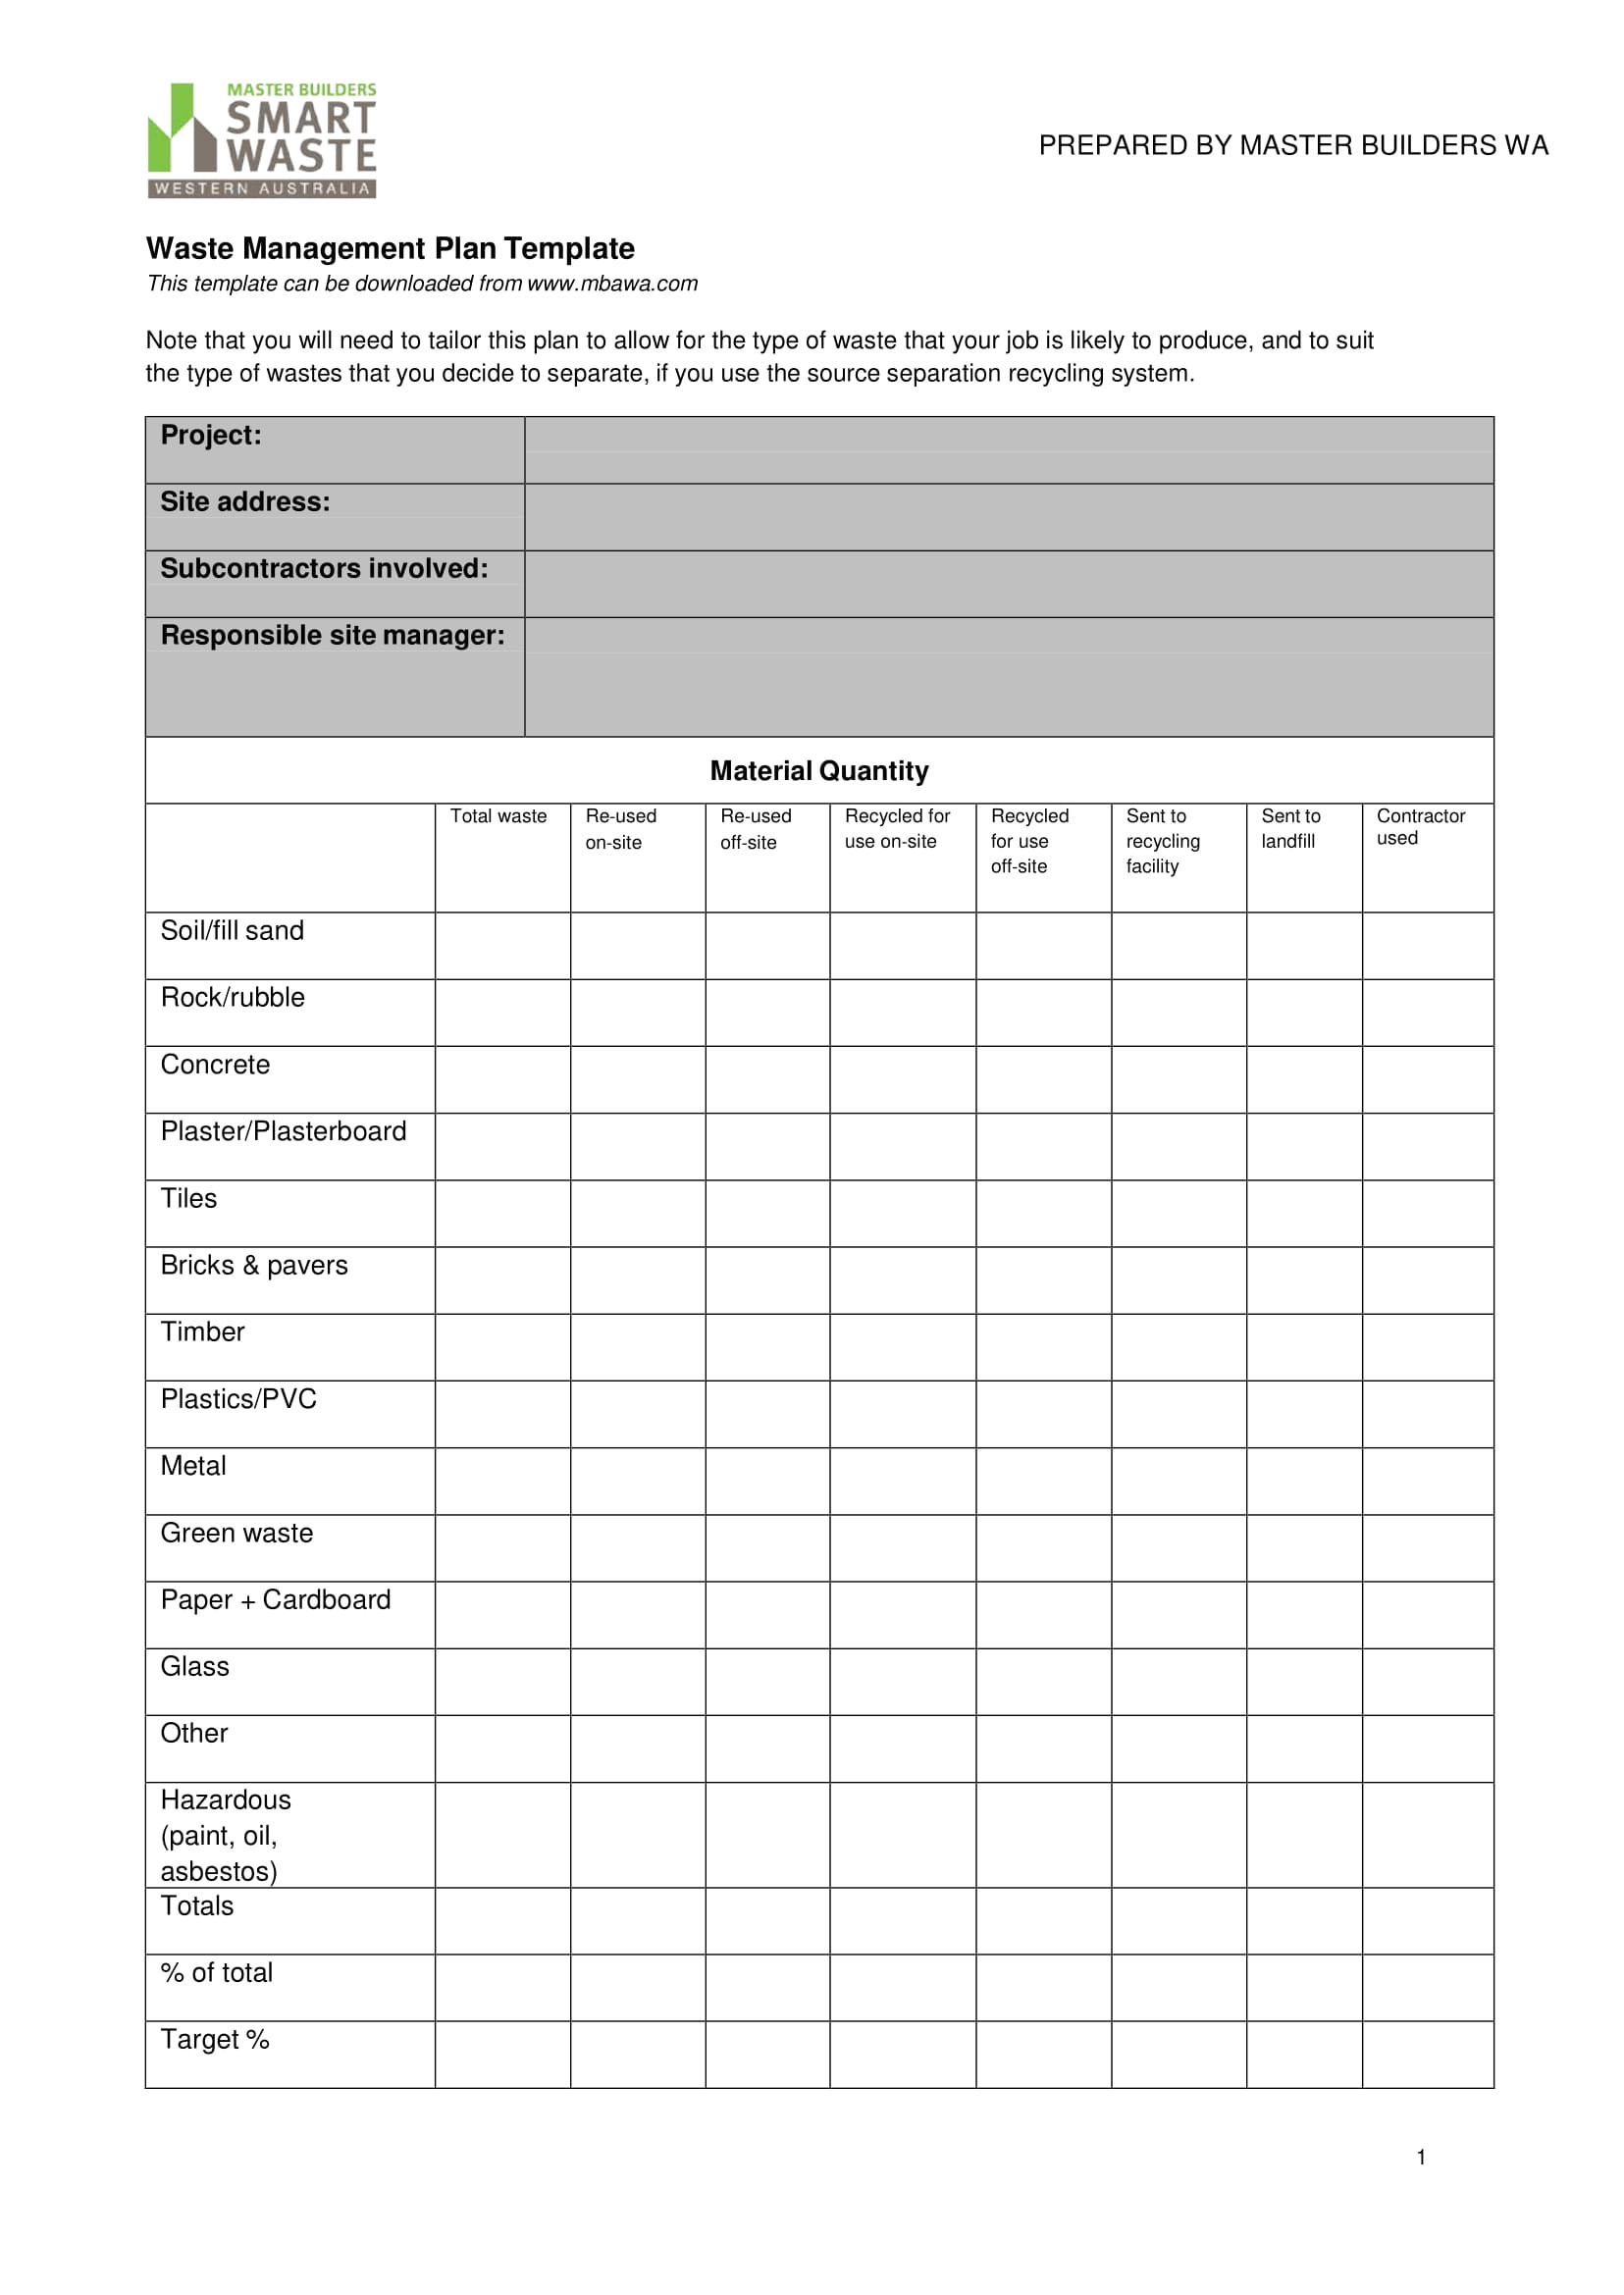 Waste Management Strategy Template 14 Waste Management Plan Examples Pdf